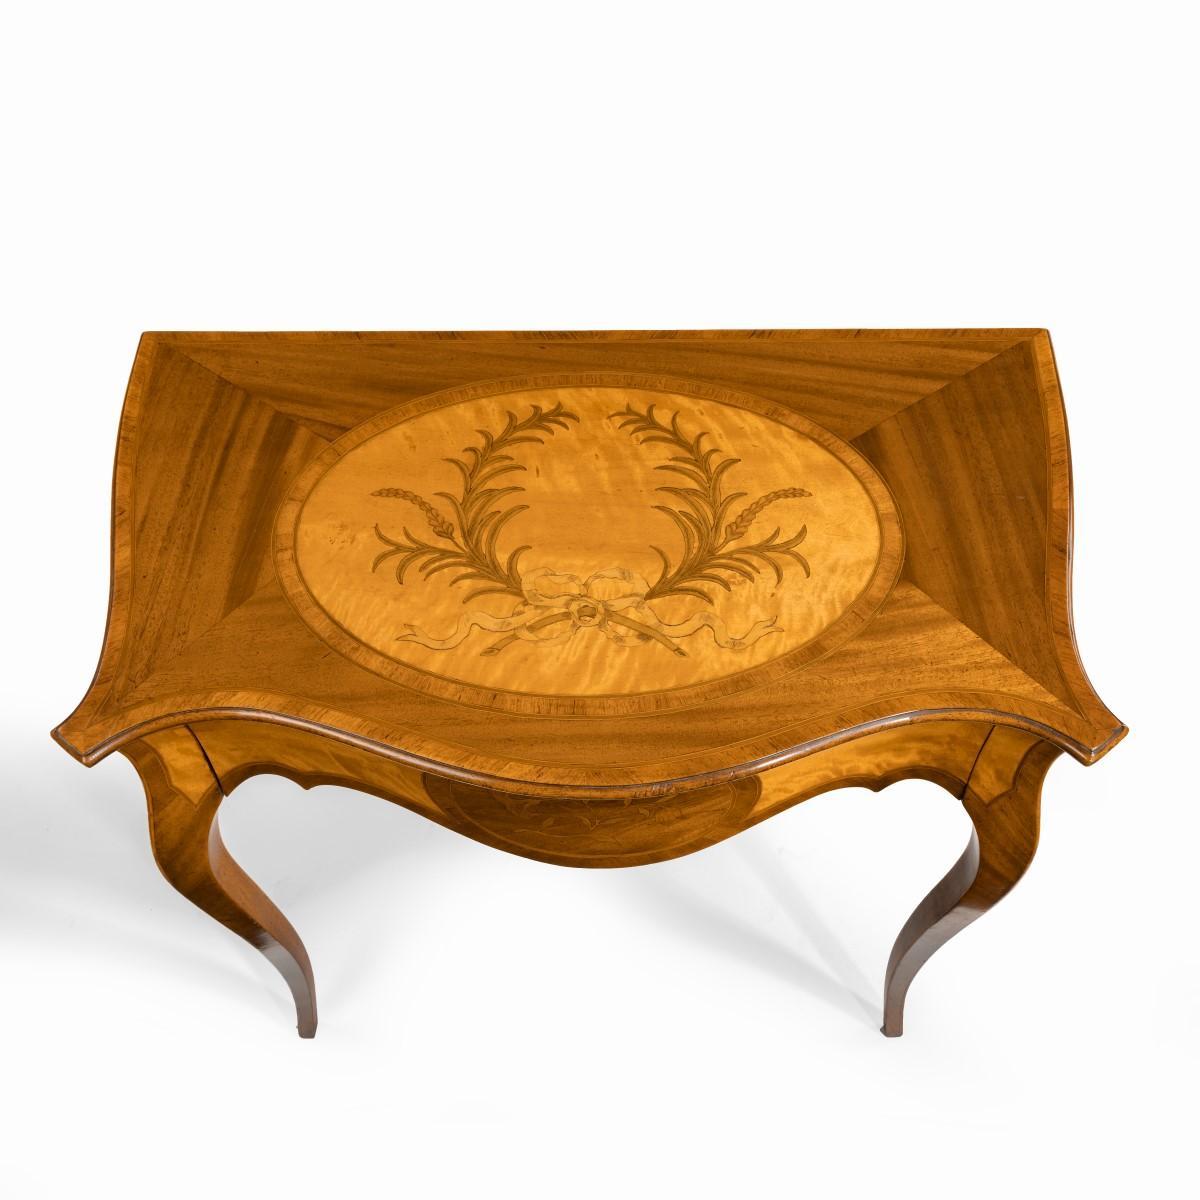 A Victorian inlaid satinwood and kingwood table in the style of Hepplewhite, the serpentine top above a single disguised frieze drawer raised on slender shaped legs, the top decorated with an oval panel inlaid with a laurel wreath on a satinwood